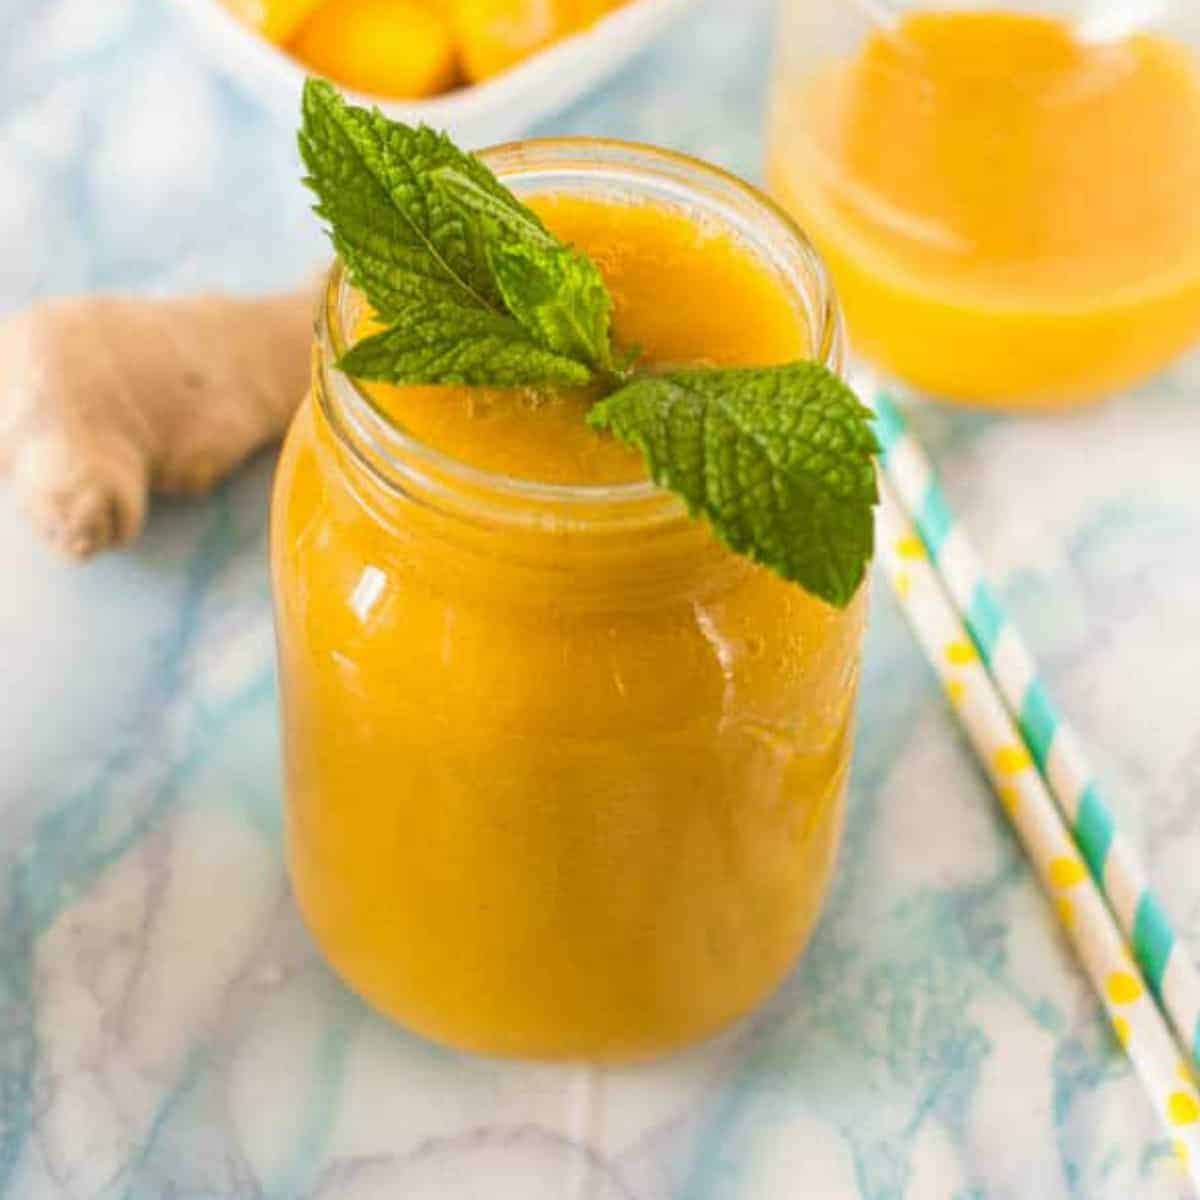 Mango and Coconut Recovery Smoothie - JT's Coconut Essence